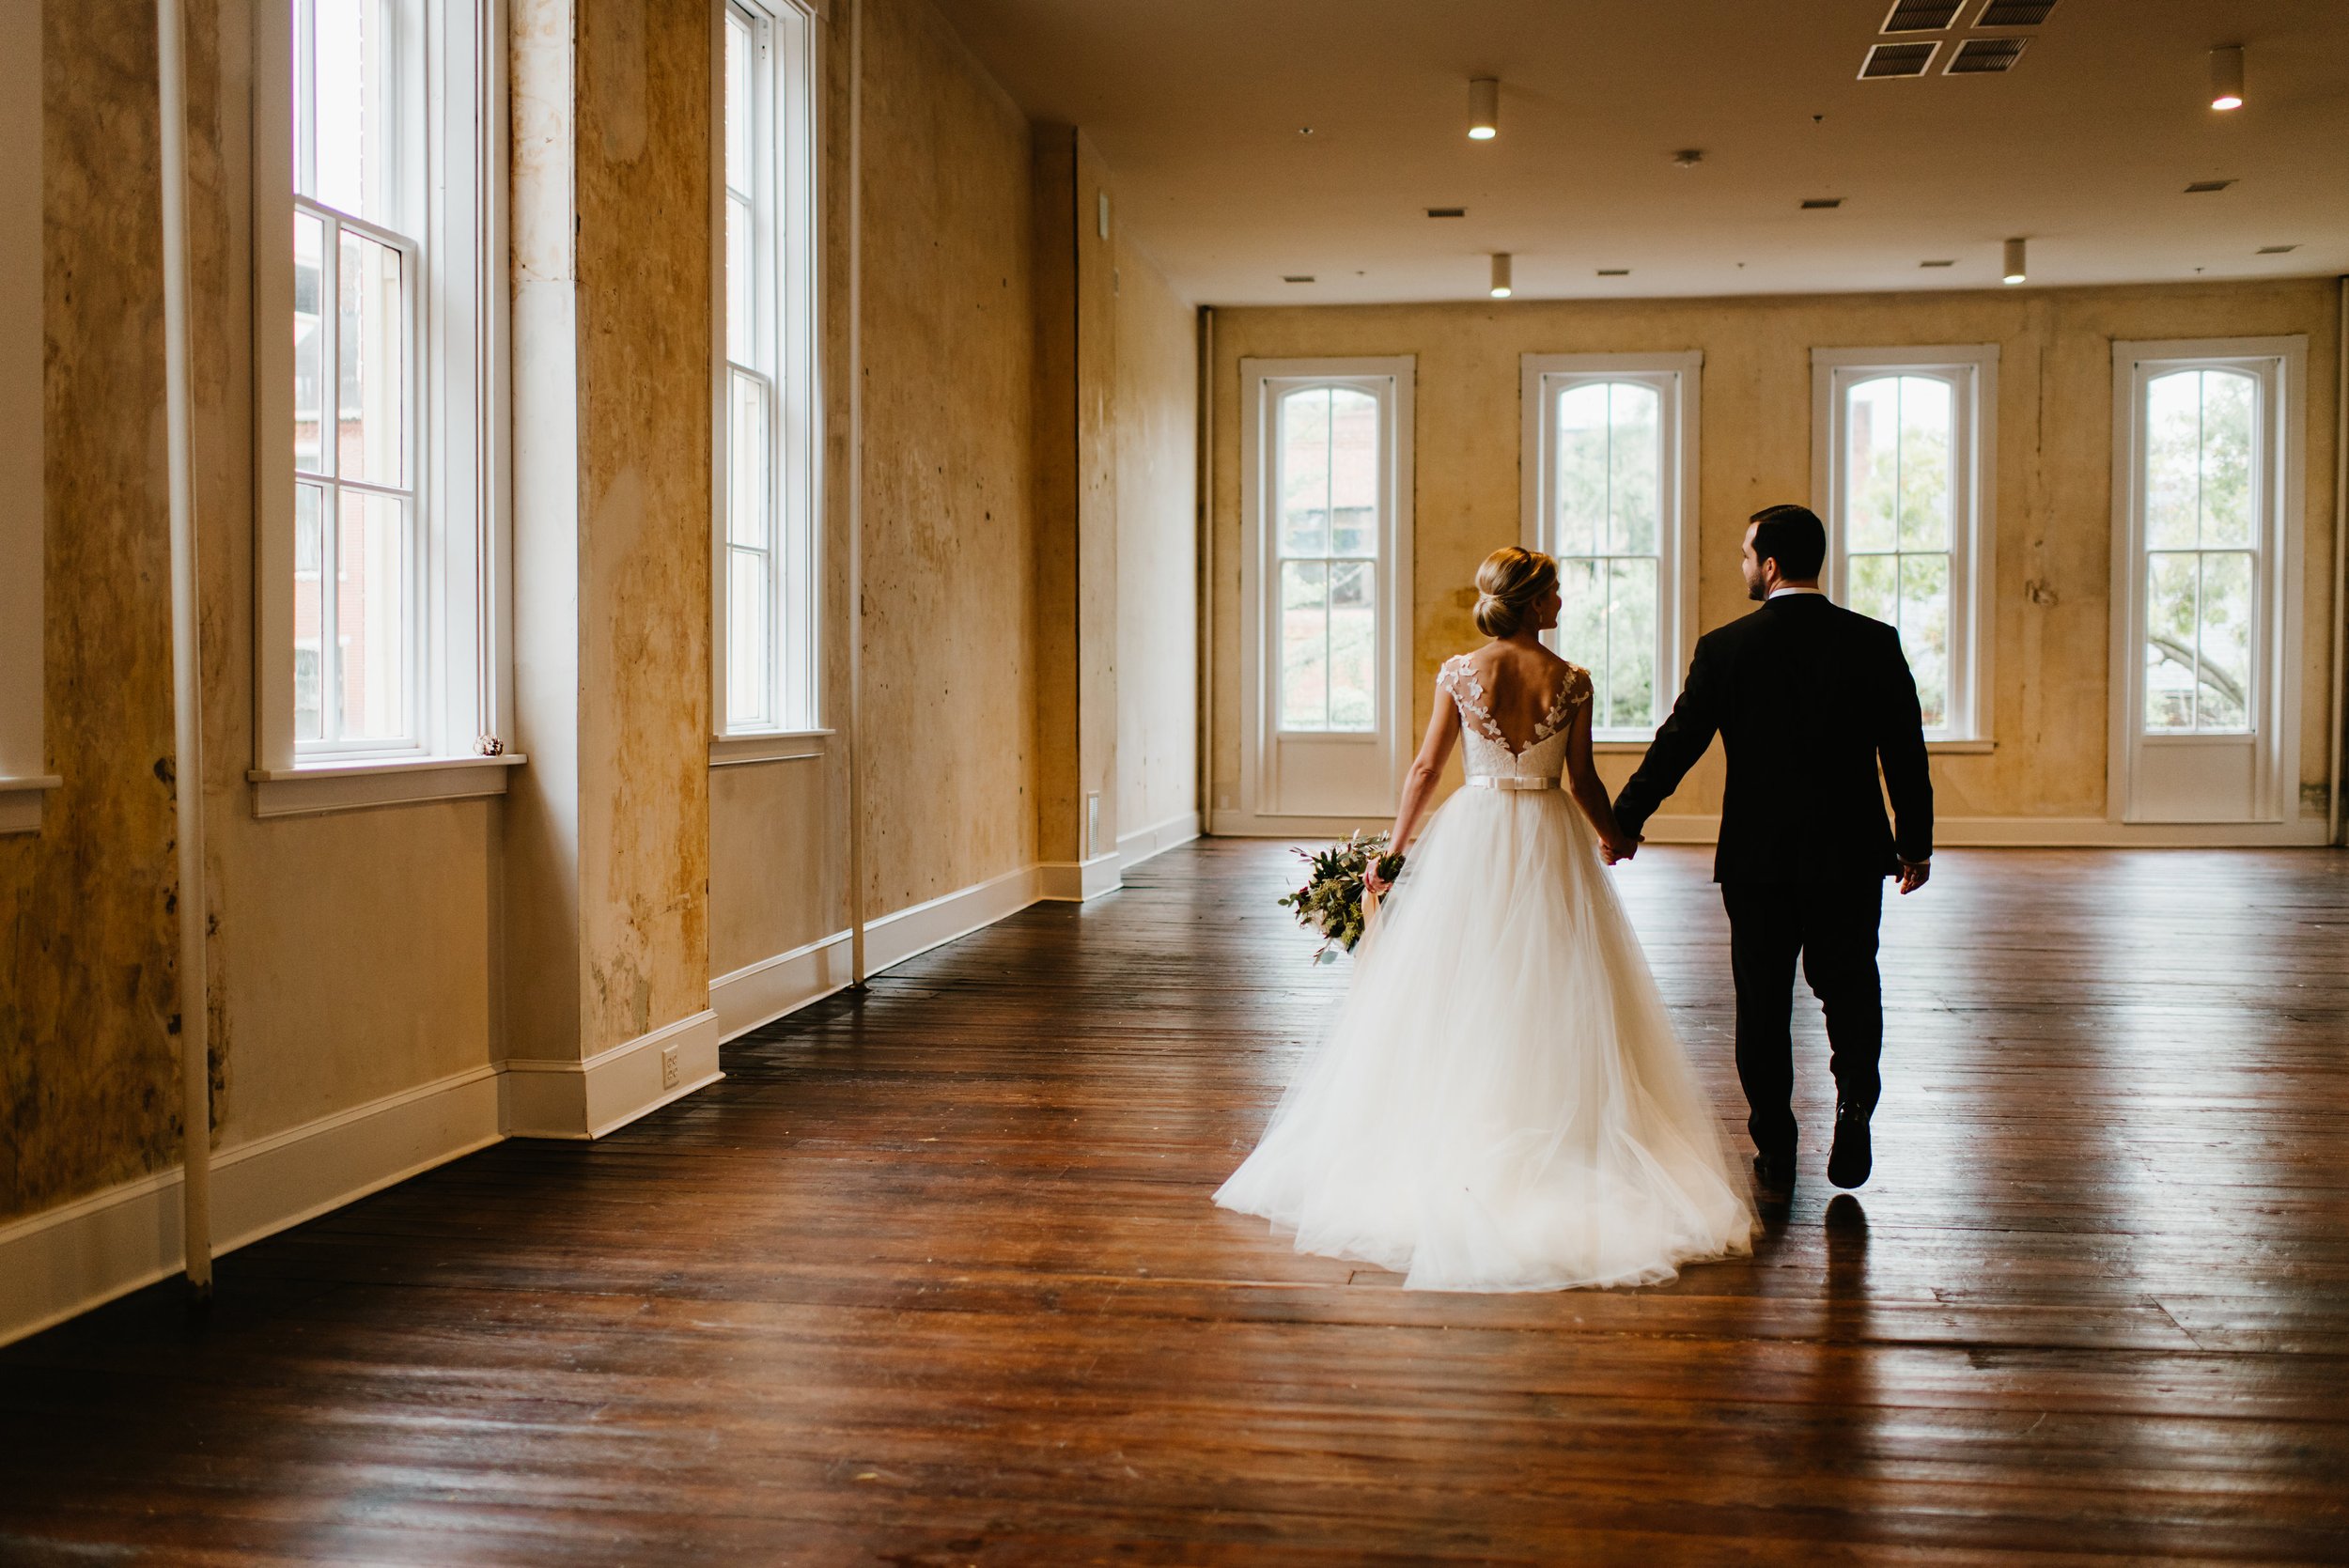 Bride and groom surrounded by golden light in large Empire Room at Excelsior